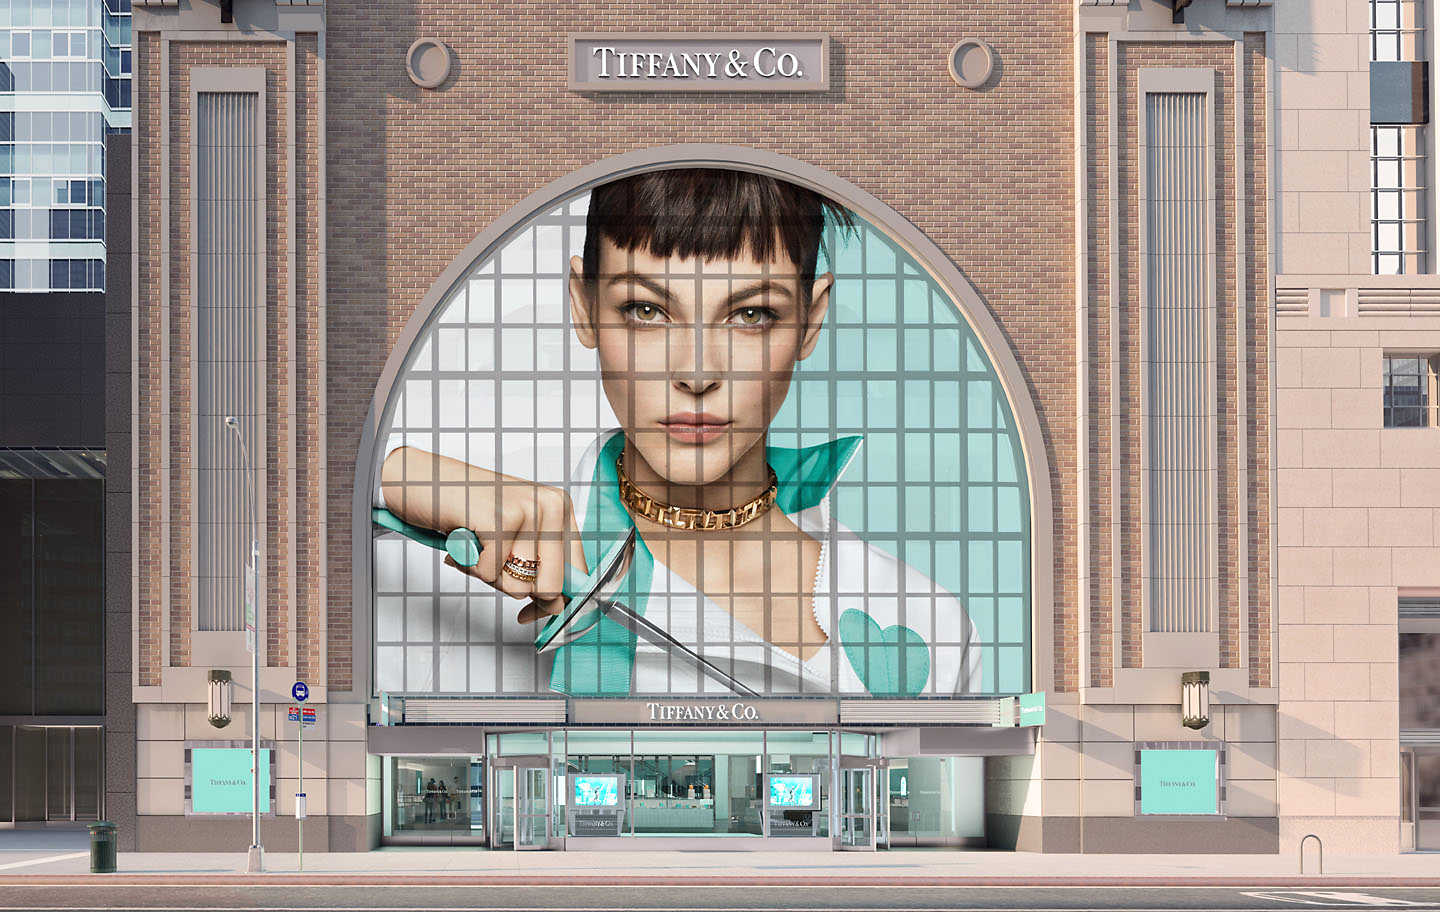 LVMH to Back Out from $16 Billion Tiffany Deal